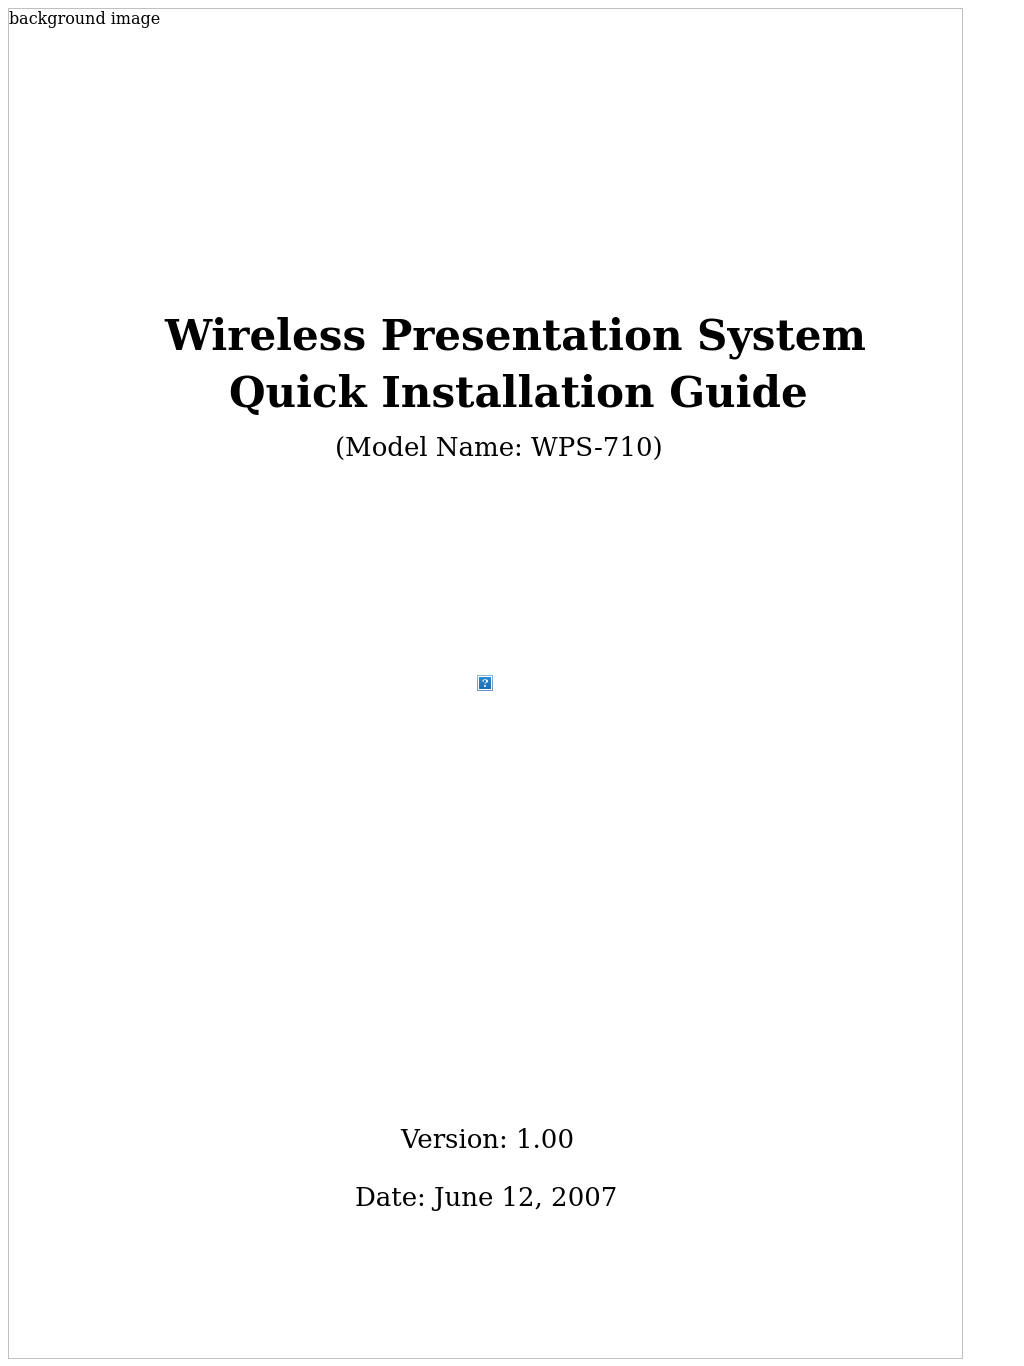 WPS-710 Quick Install Guide